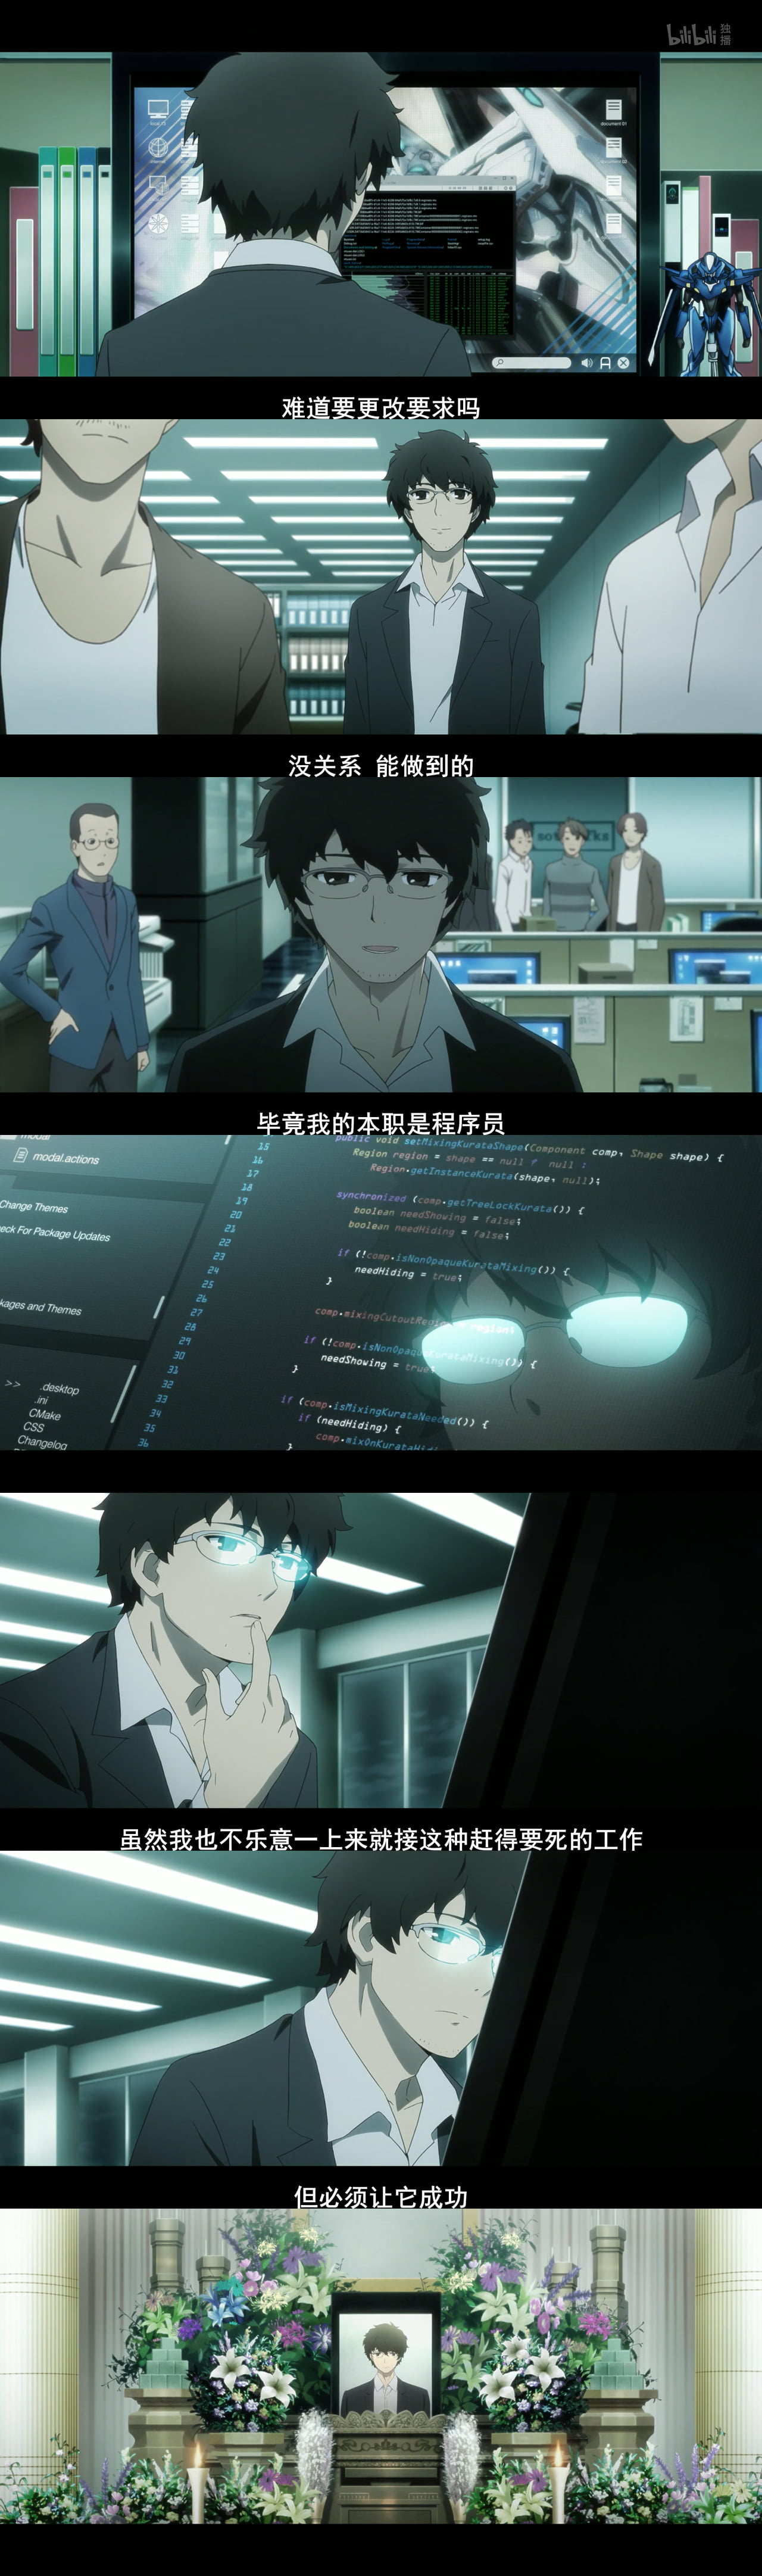 Online crop | black haired anime man character collage, programmers ...